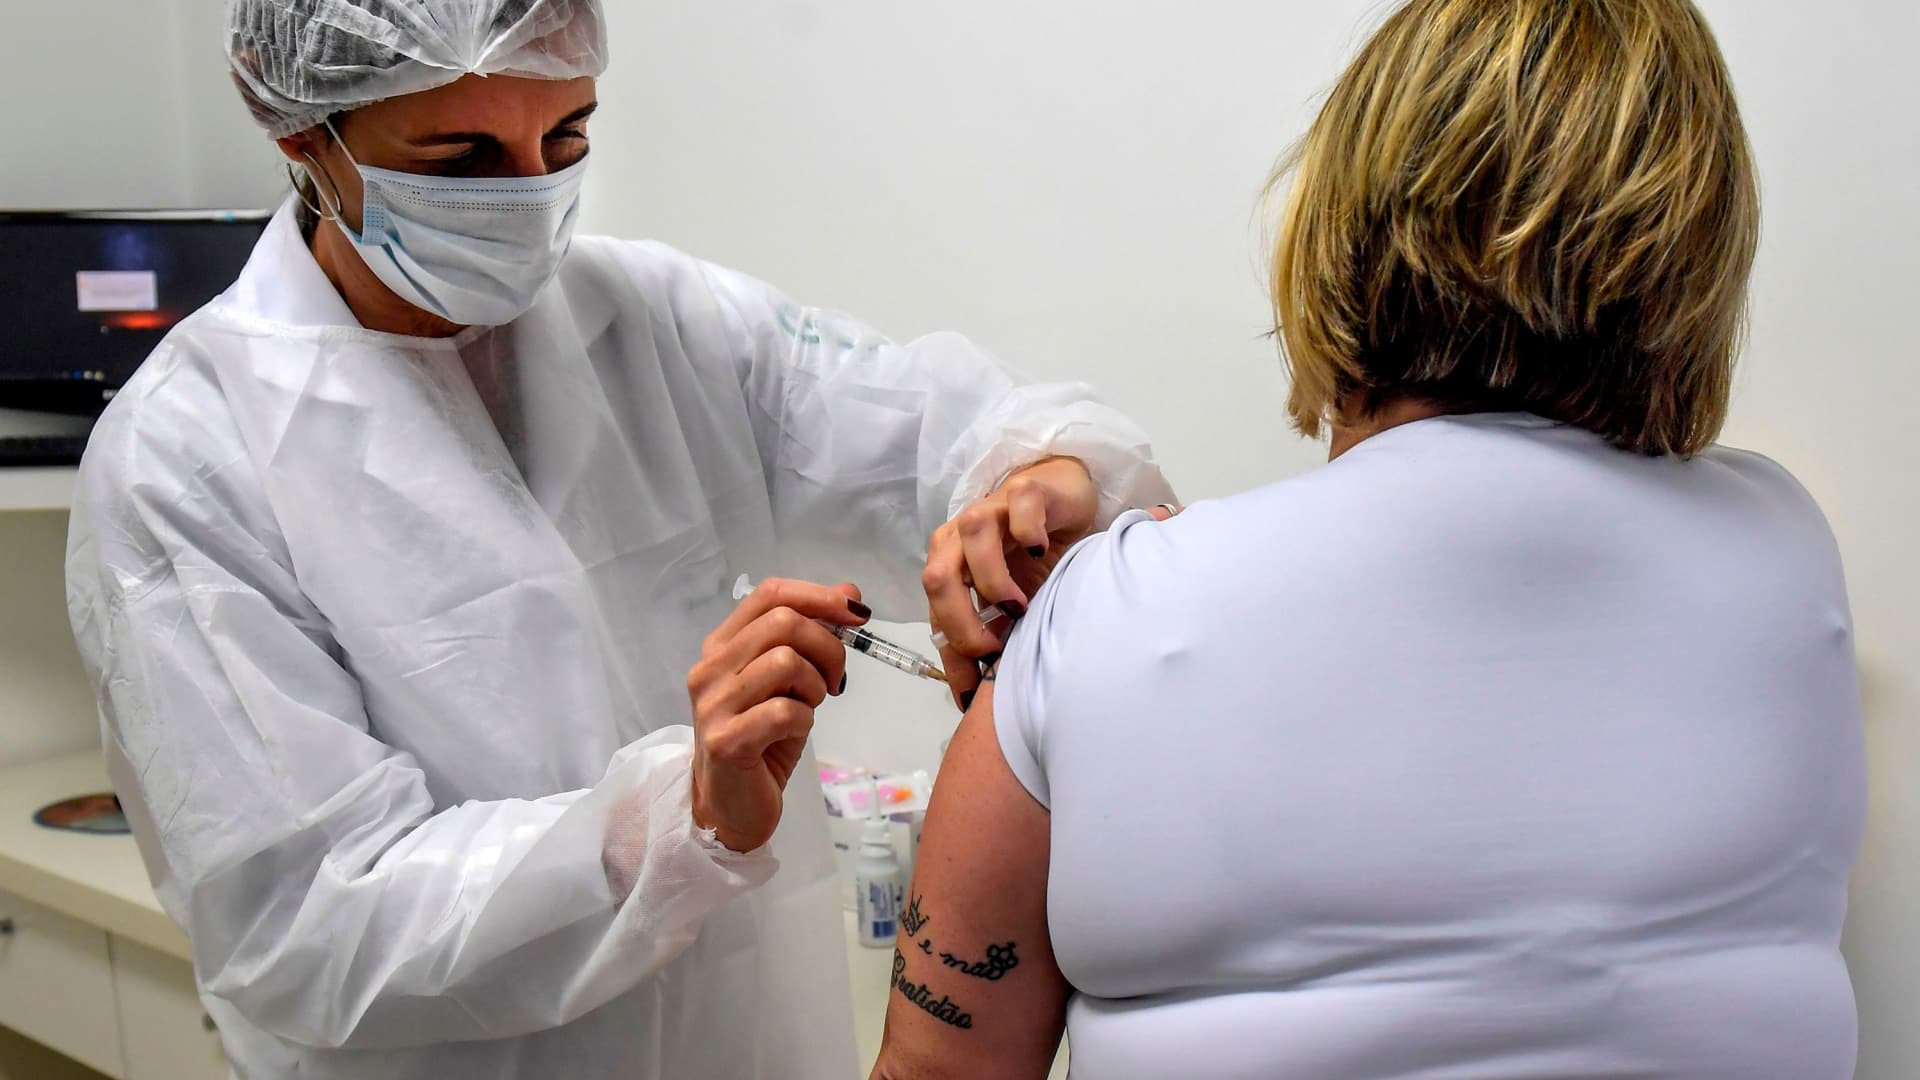 A Brazilian doctor voluntarily receives an injection as part of phase 3 trials of a vaccine developed by the University of Oxford and British pharmaceutical company AstraZeneca, in July 2020.